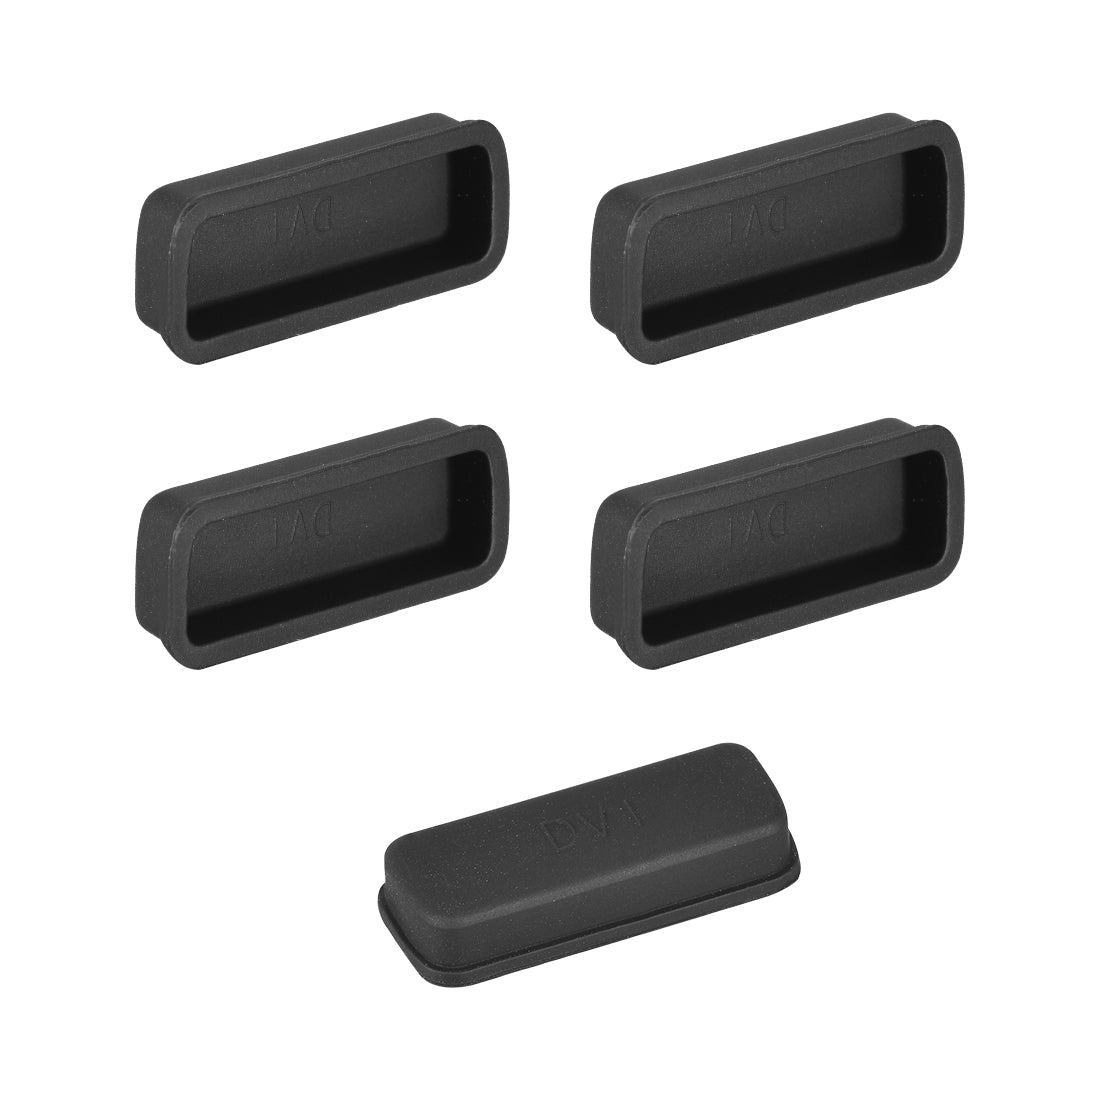 uxcell Uxcell Silicone DVI Video Port Anti-Dust Stopper Cap Cover Black 5pcs